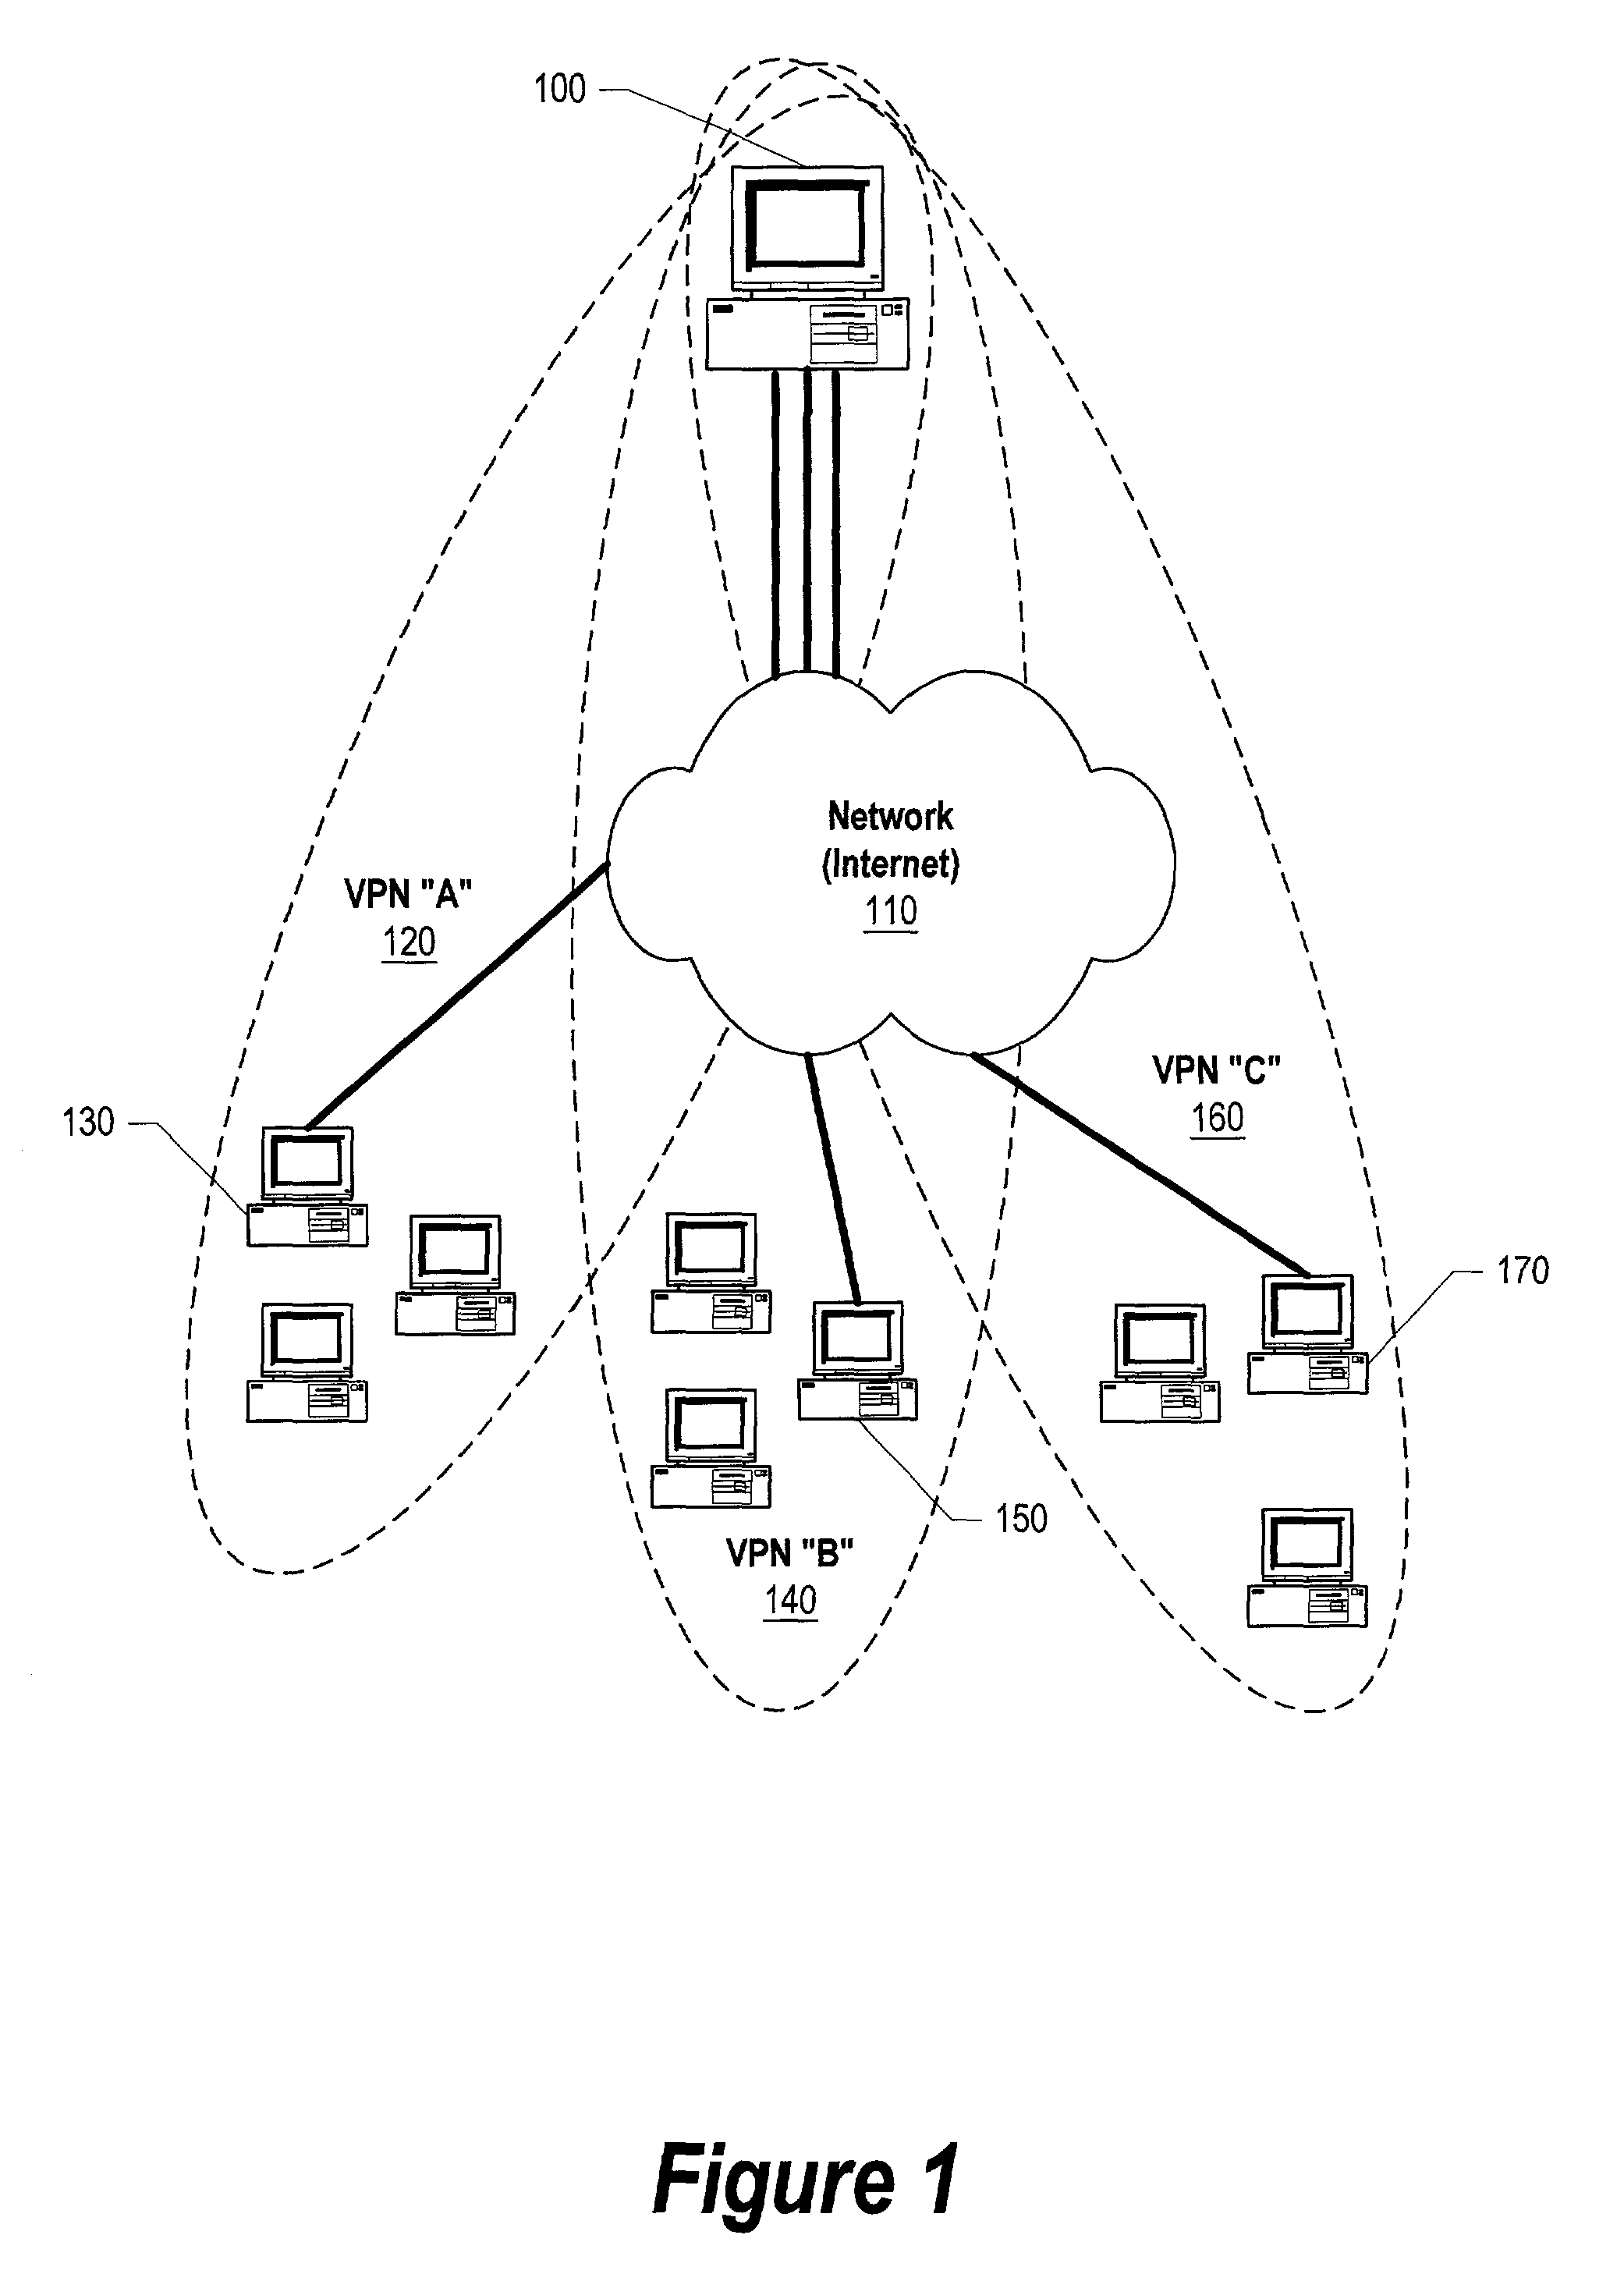 System and method for dynamically determining CRL locations and access methods